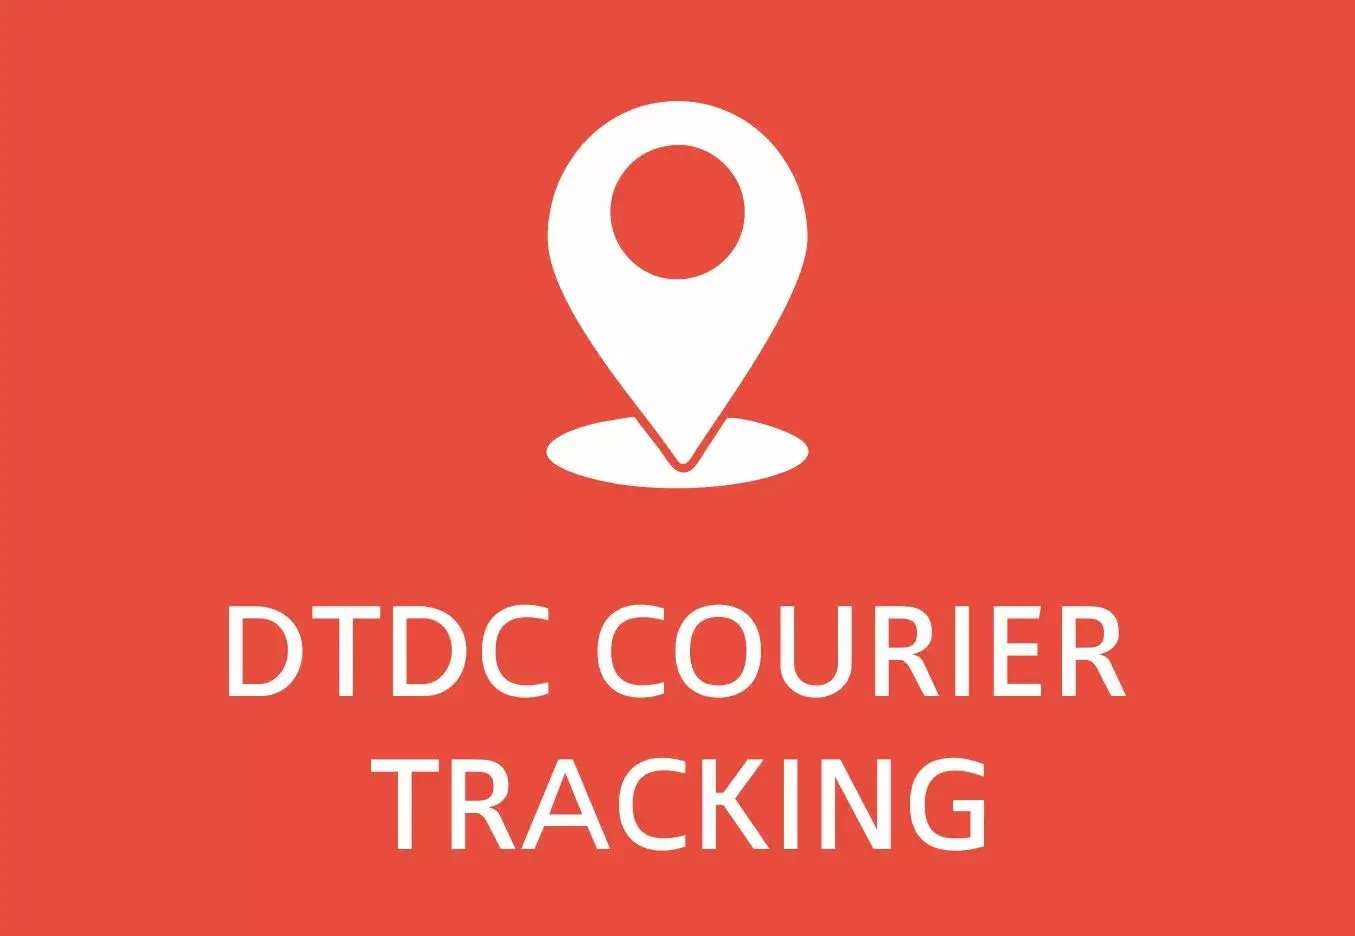 Dtdc courier tracking – check your consignment status here